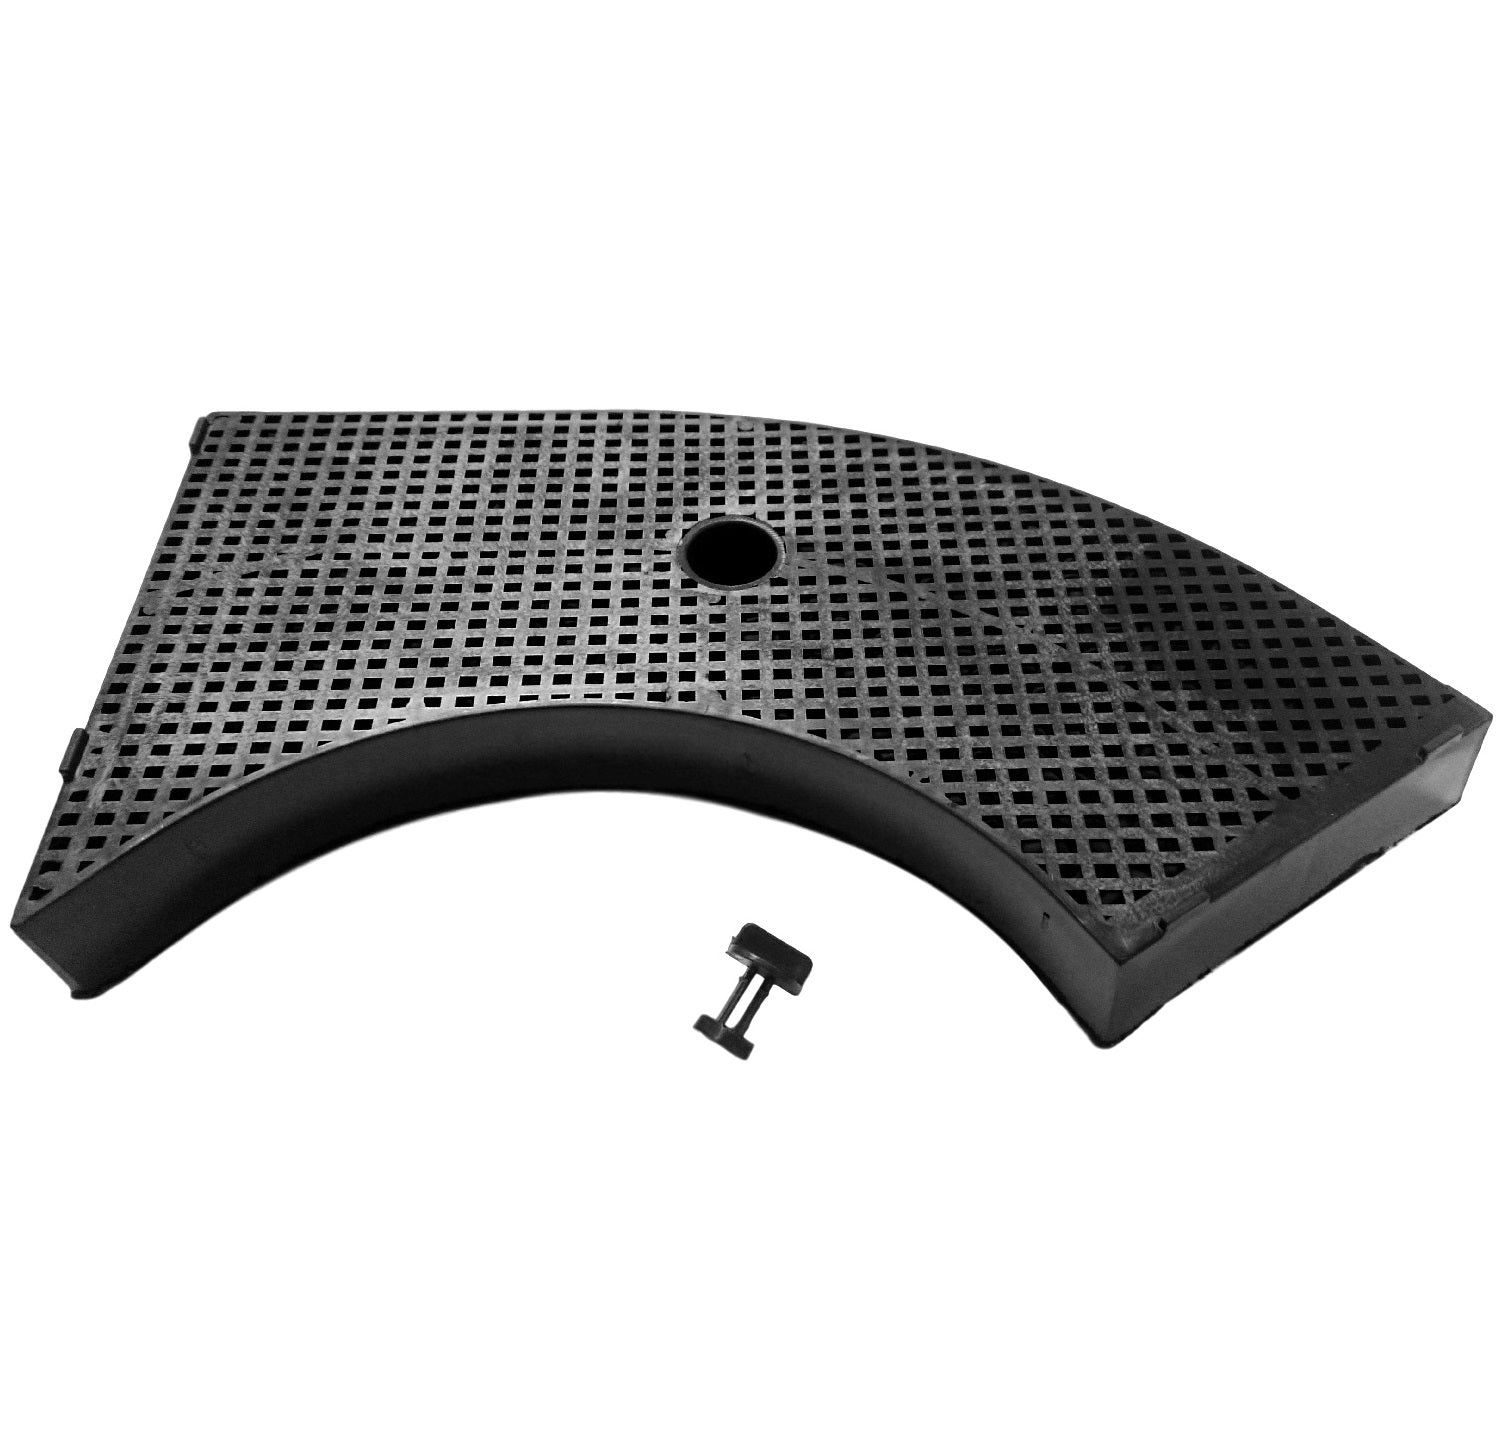 Firenzi Compatible Cooker Hood Carbon Filter - Type 10 Charcoal Filters